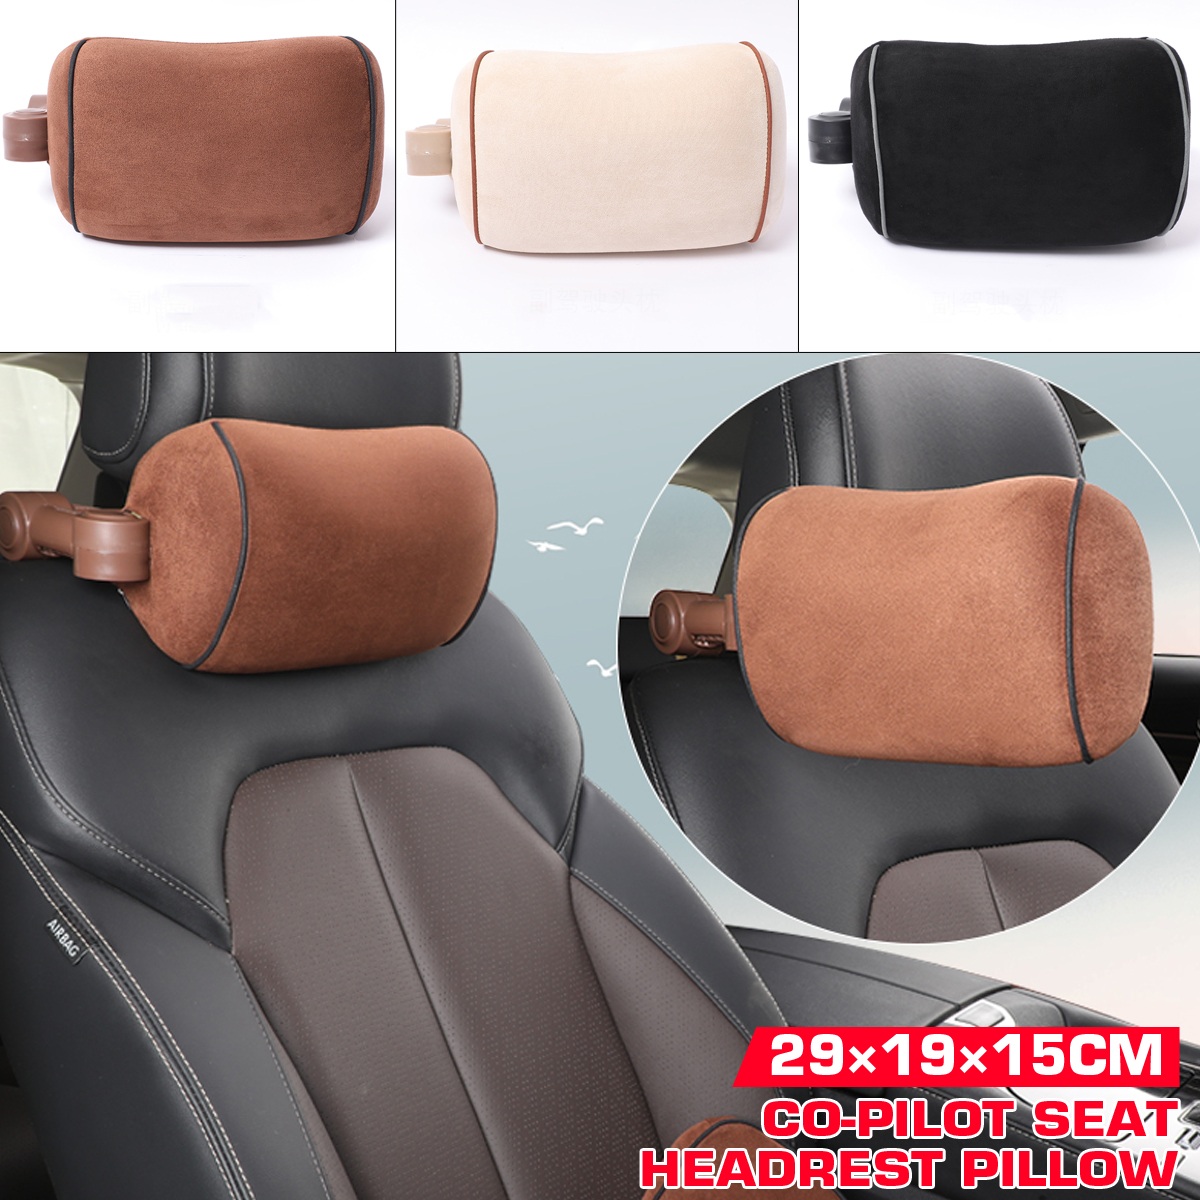 291915cm-Cervical-Multifunctional-Child-Adult-Travel-Car-Right-Seat-U-shaped-Neck-Pillow-Headrest-1784627-2